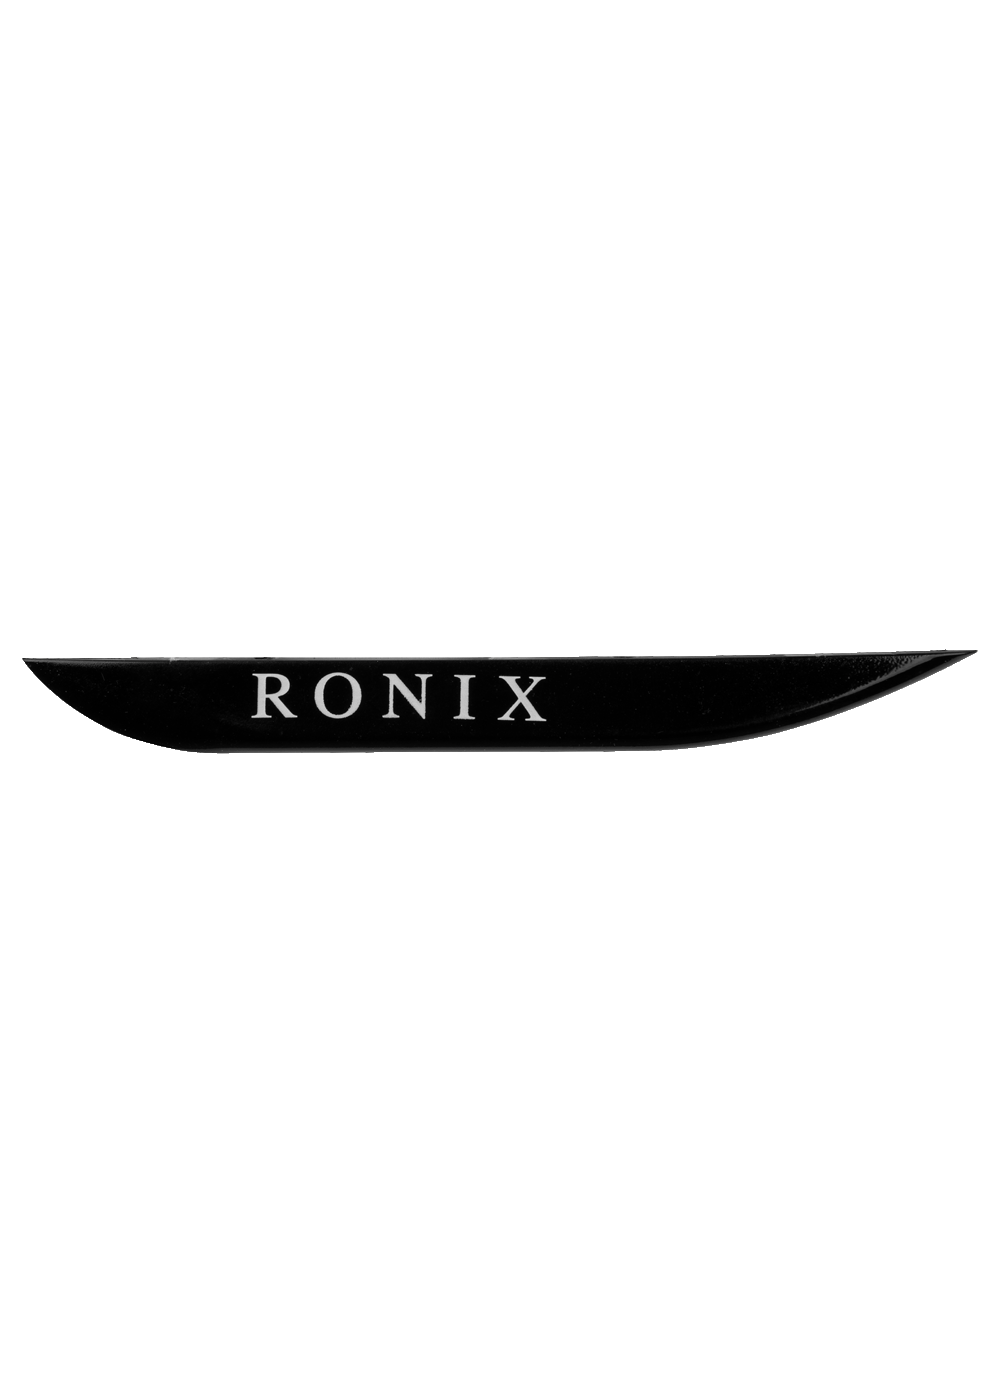 White Ronix 0.8 Ramp Wakeboard Fins Set of 2 fins and hardware 